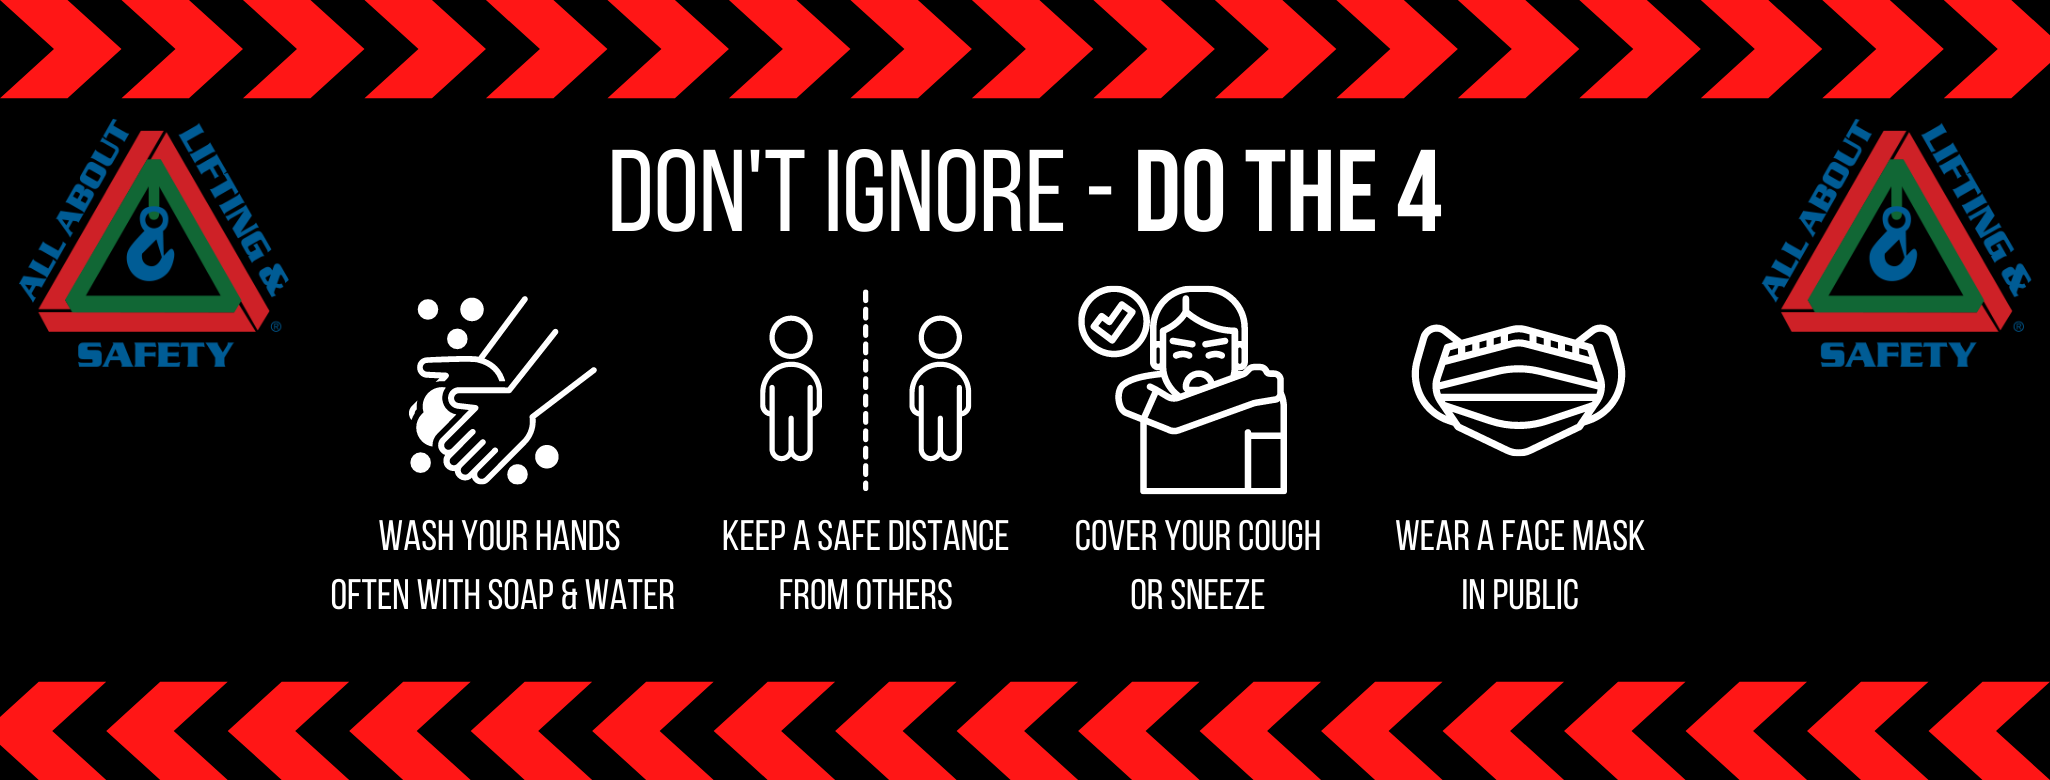 COVID-19 Safety - Don't Ignore - Do The 4